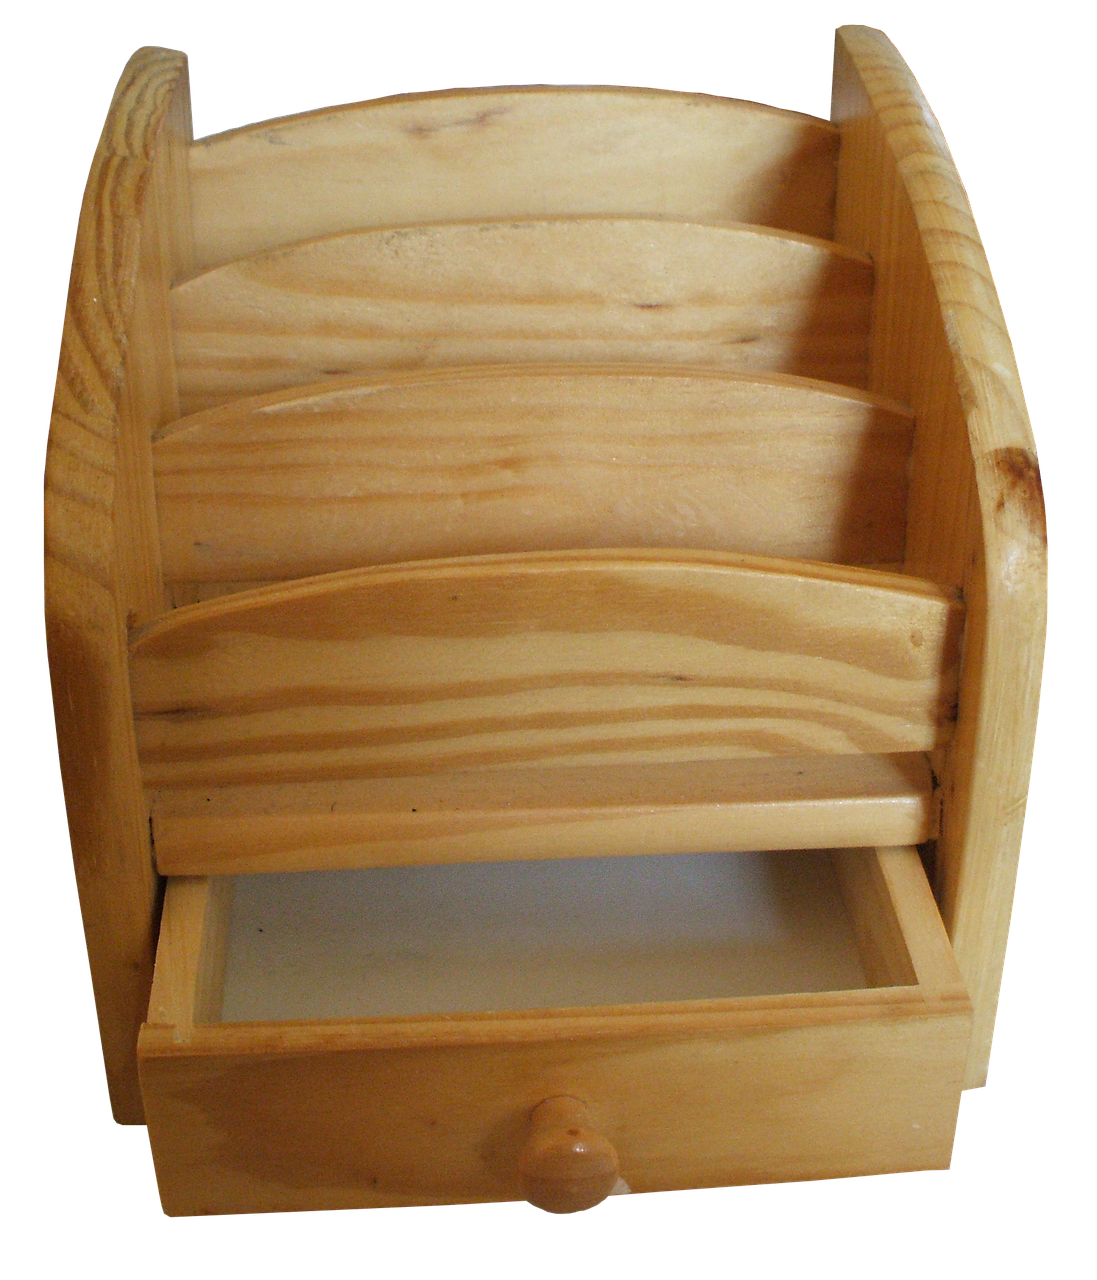 wood drawer compartment free photo